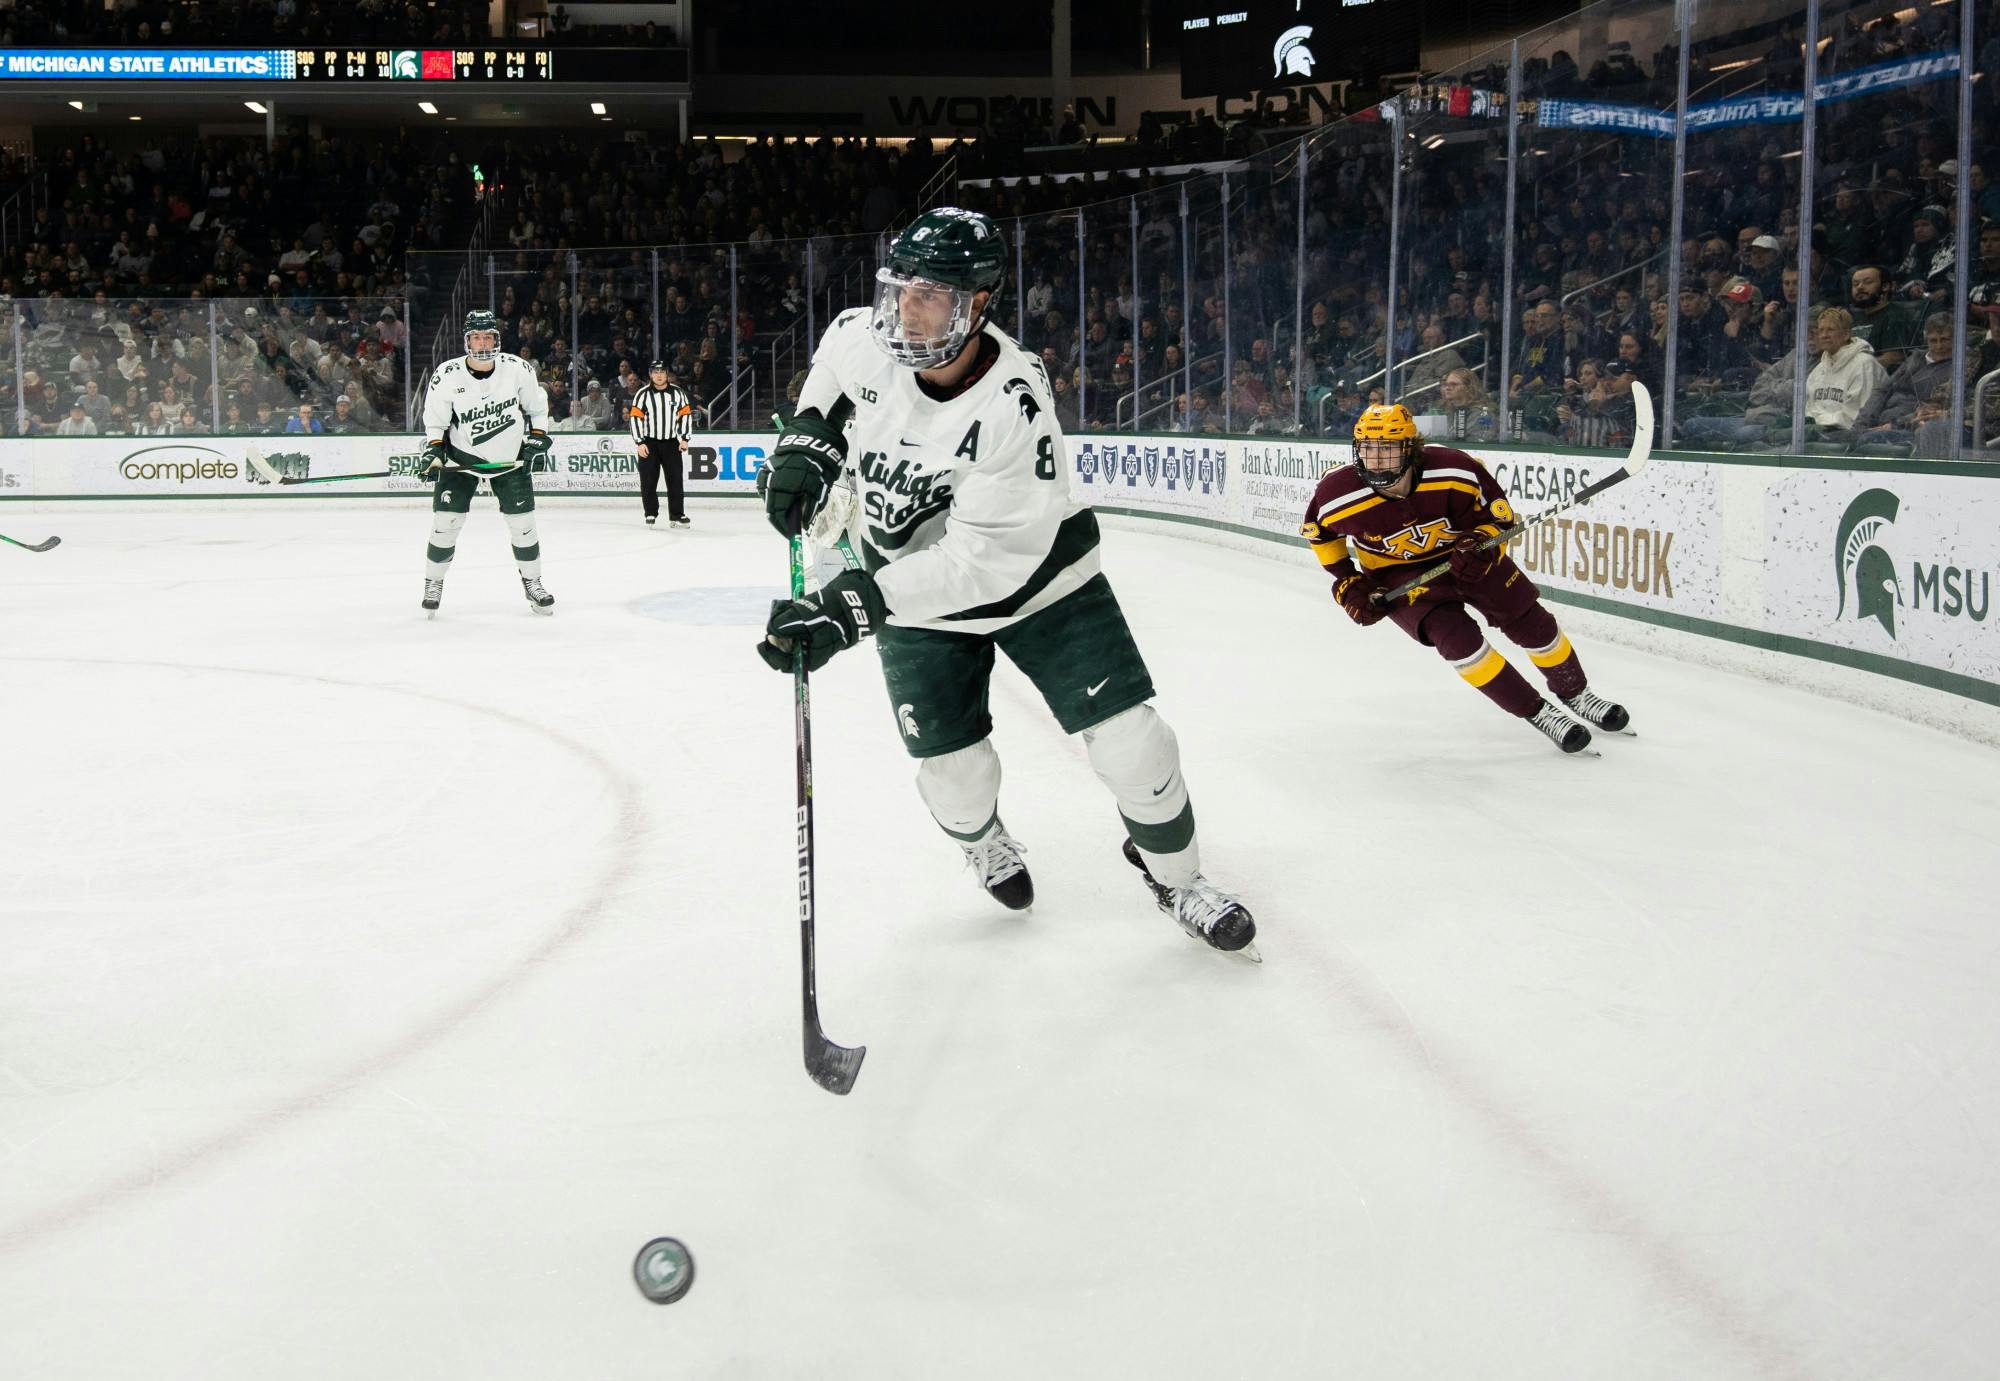 5th year defensemen Cole Krygier (8) keeps the puck away from University of Minnesota players during a game at Munn Ice Arena on Dec. 2, 2022. The Spartans lost to the Gophers with a score of 5-0. 